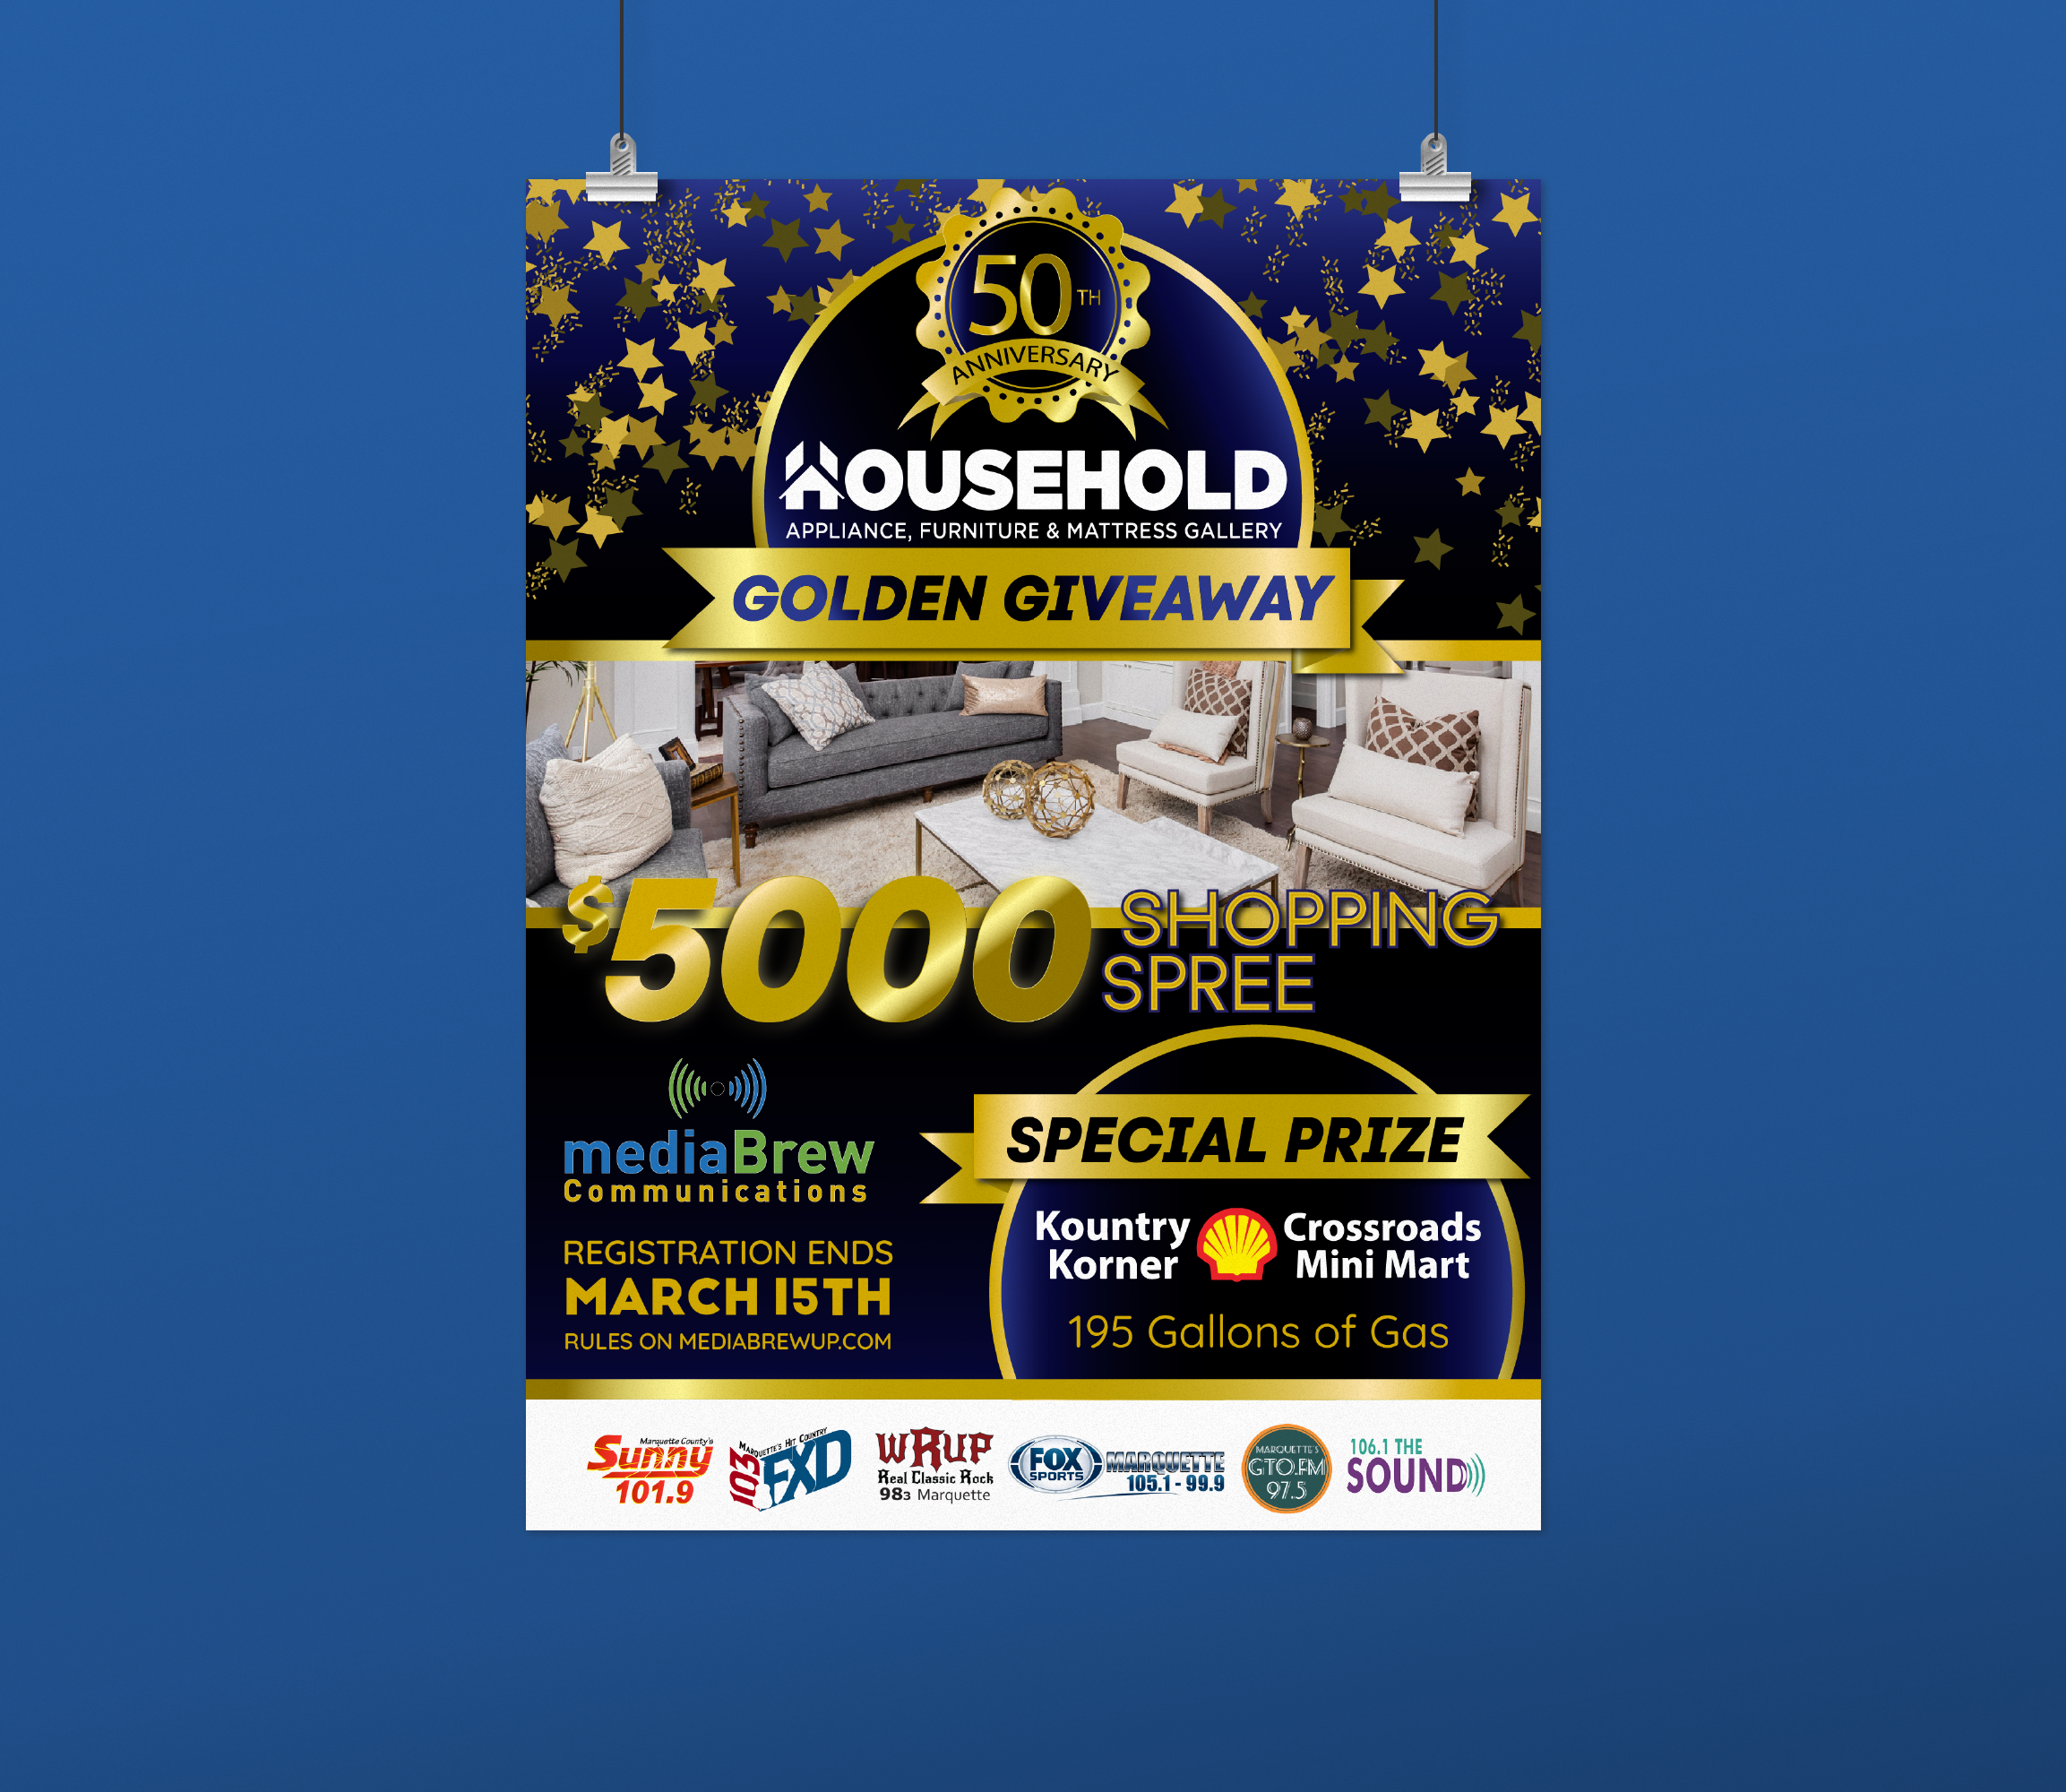 Household Golden Giveaway